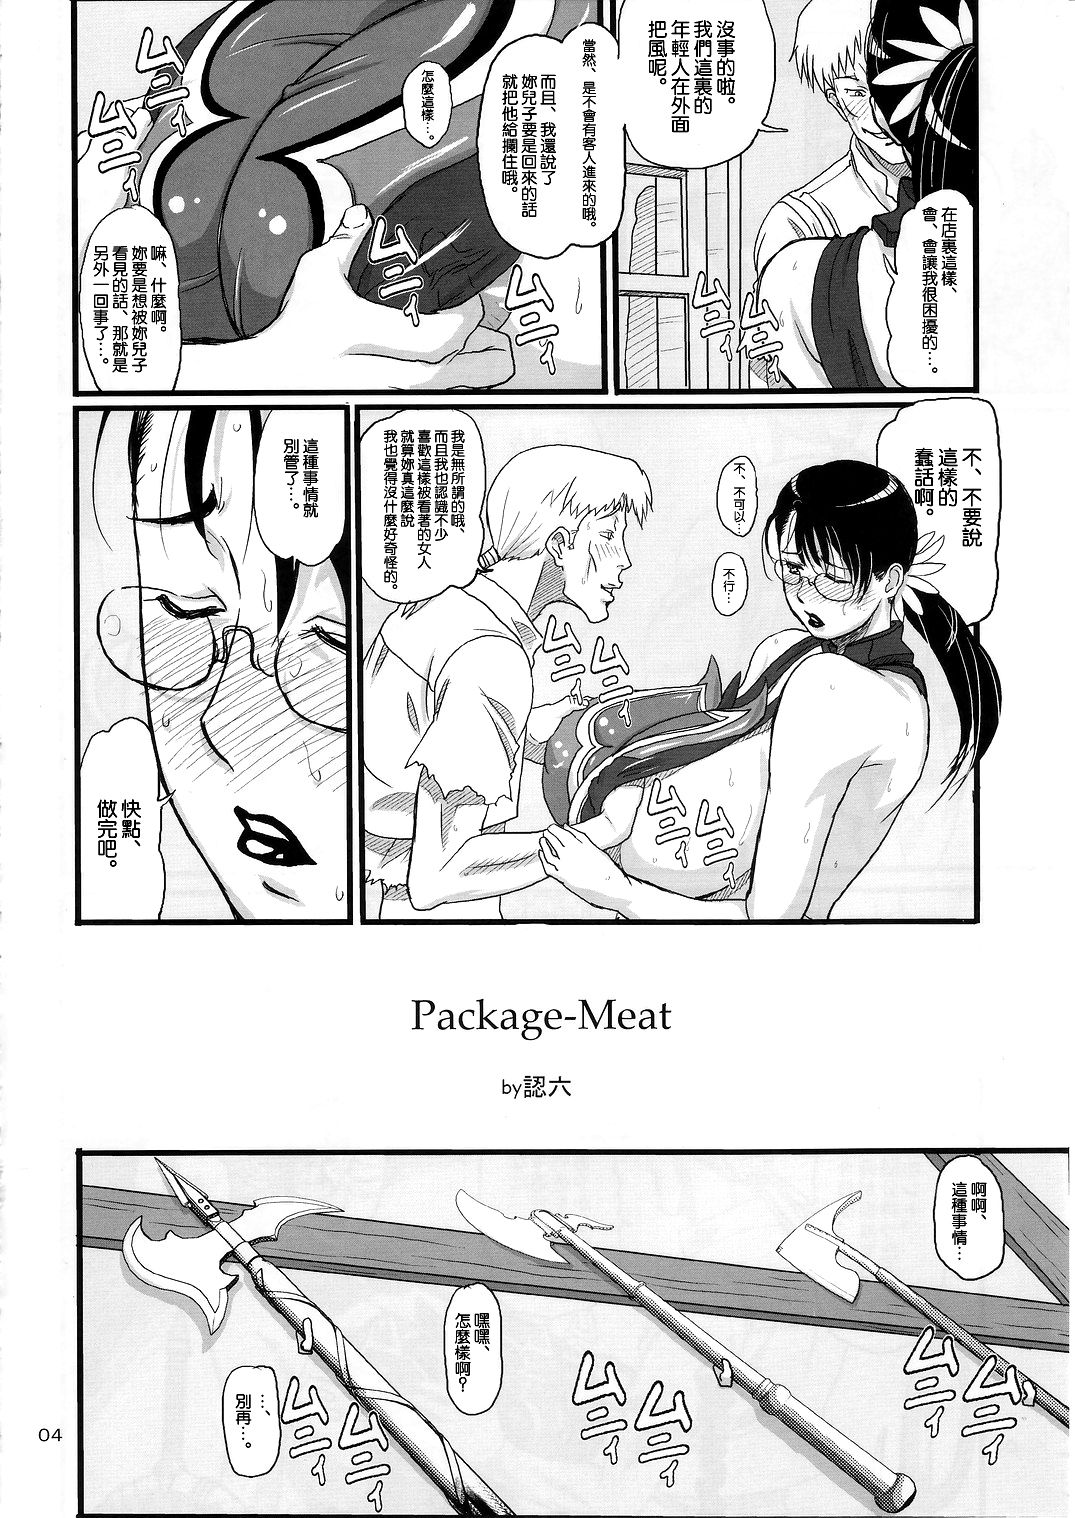 (C72) [Shiawase Pullin Dou (Ninroku)] Package Meat (Queen's Blade) [Chinese] [不咕鸟汉化组] page 4 full